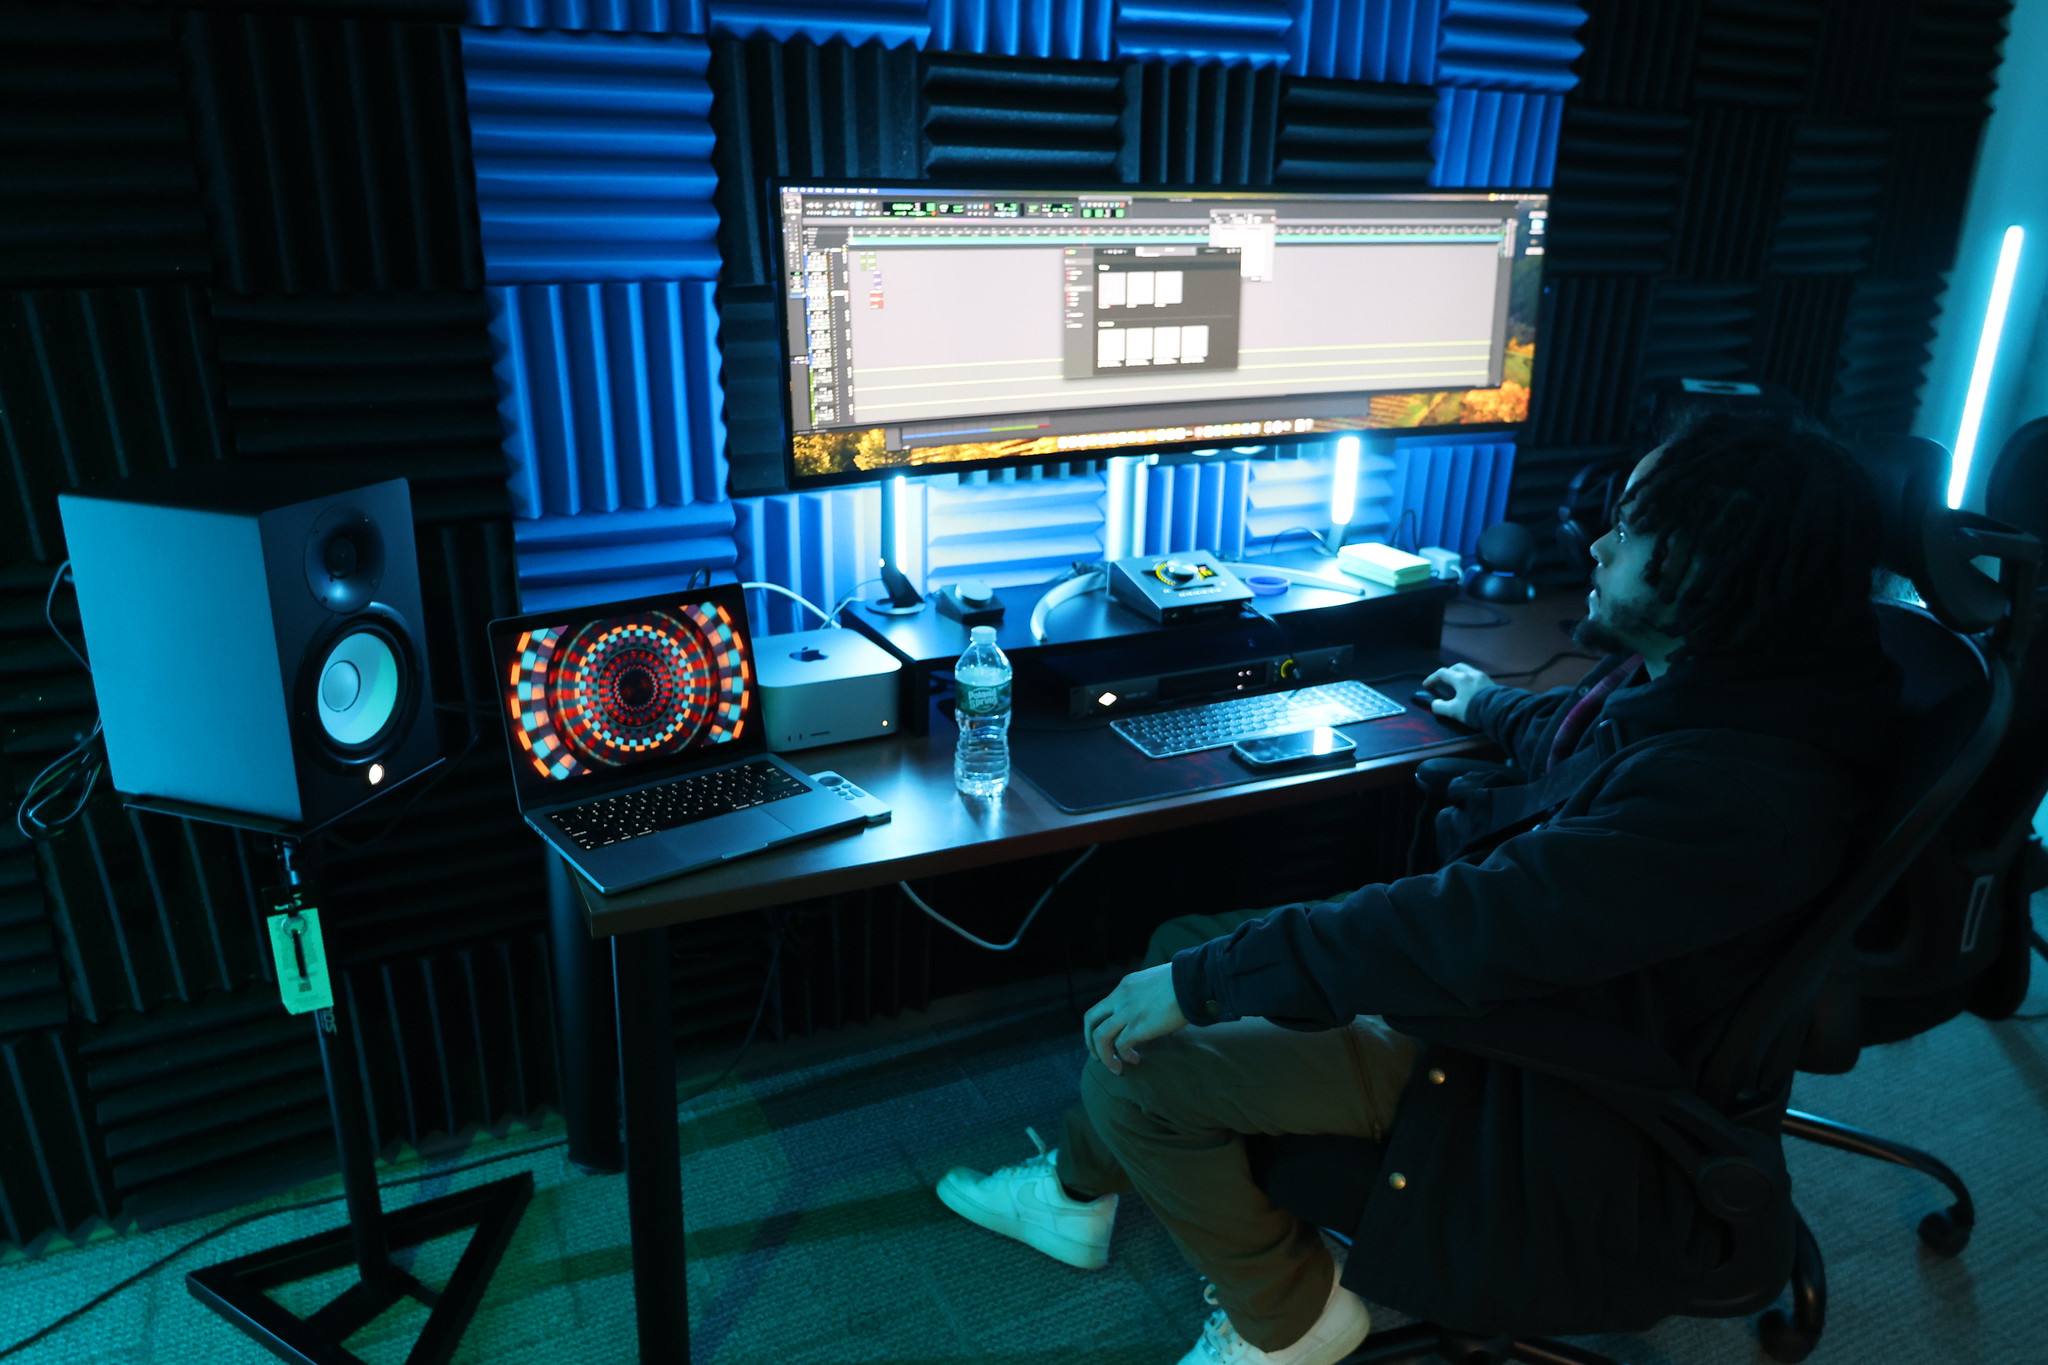 A student uses the new equipment in the Recording Studio